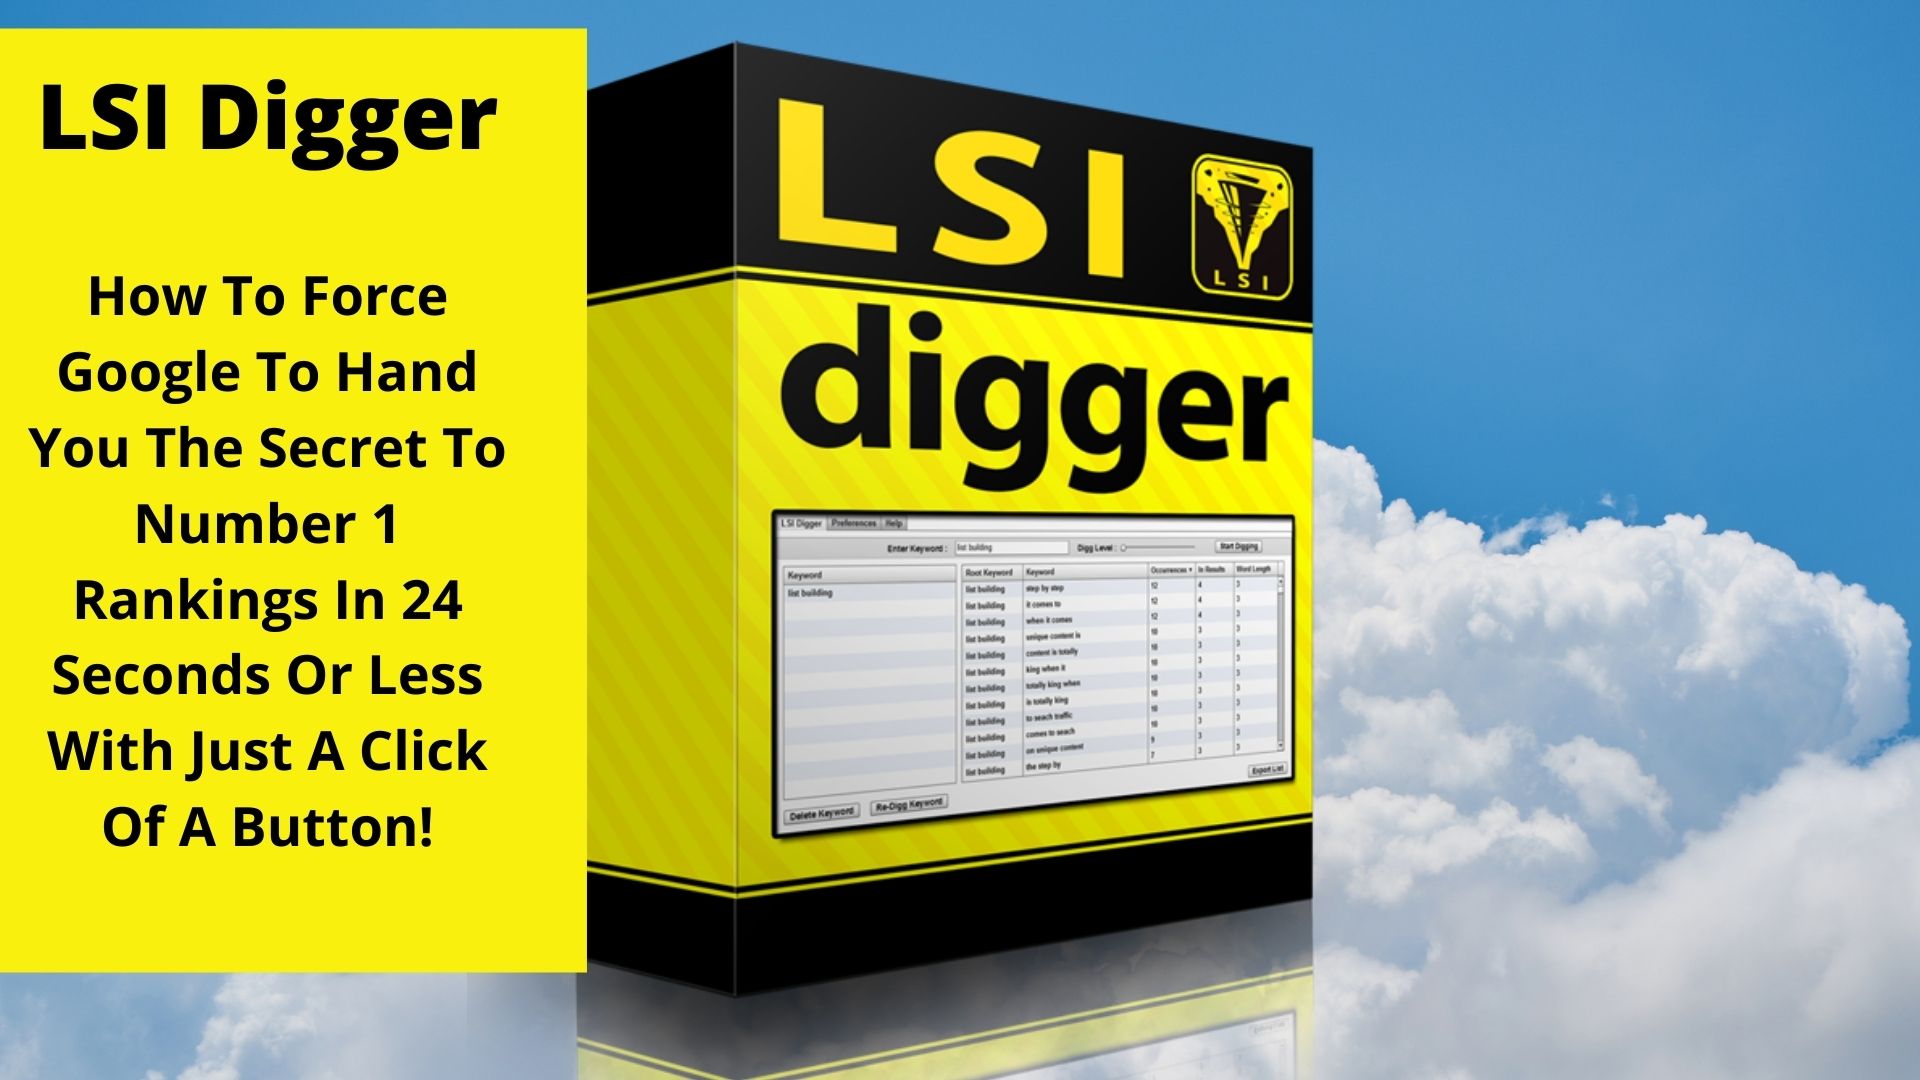 LSI Digger How To Force Google To Hand You The Secret To Number 1 Rankings In 24 Seconds